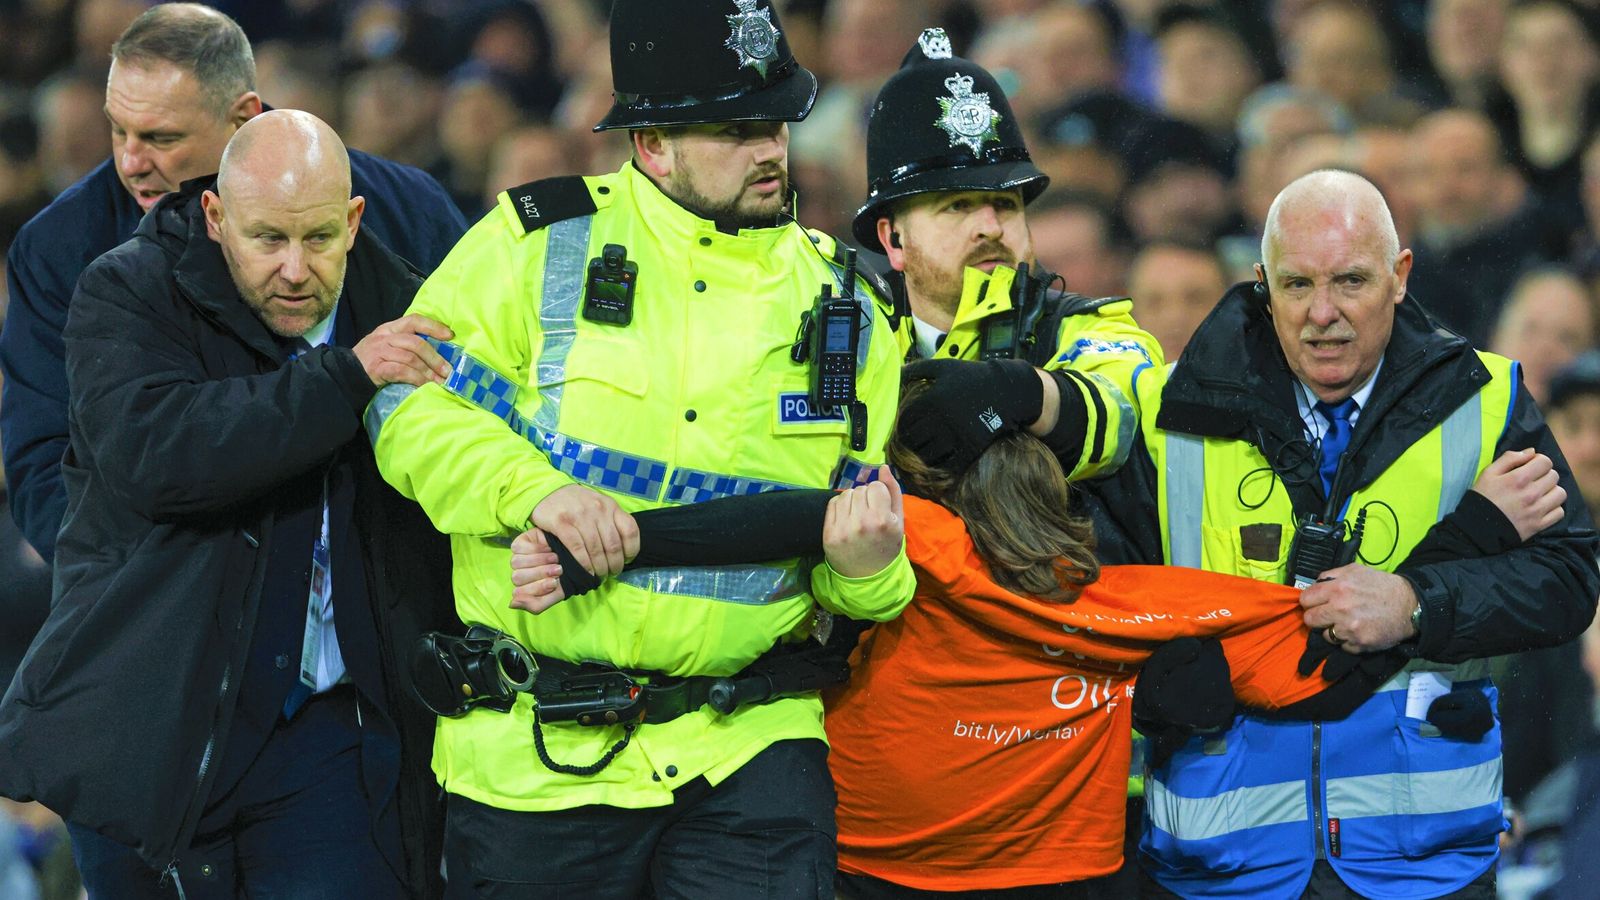 Man charged after tying himself to goal post in protest during Everton-Newcastle